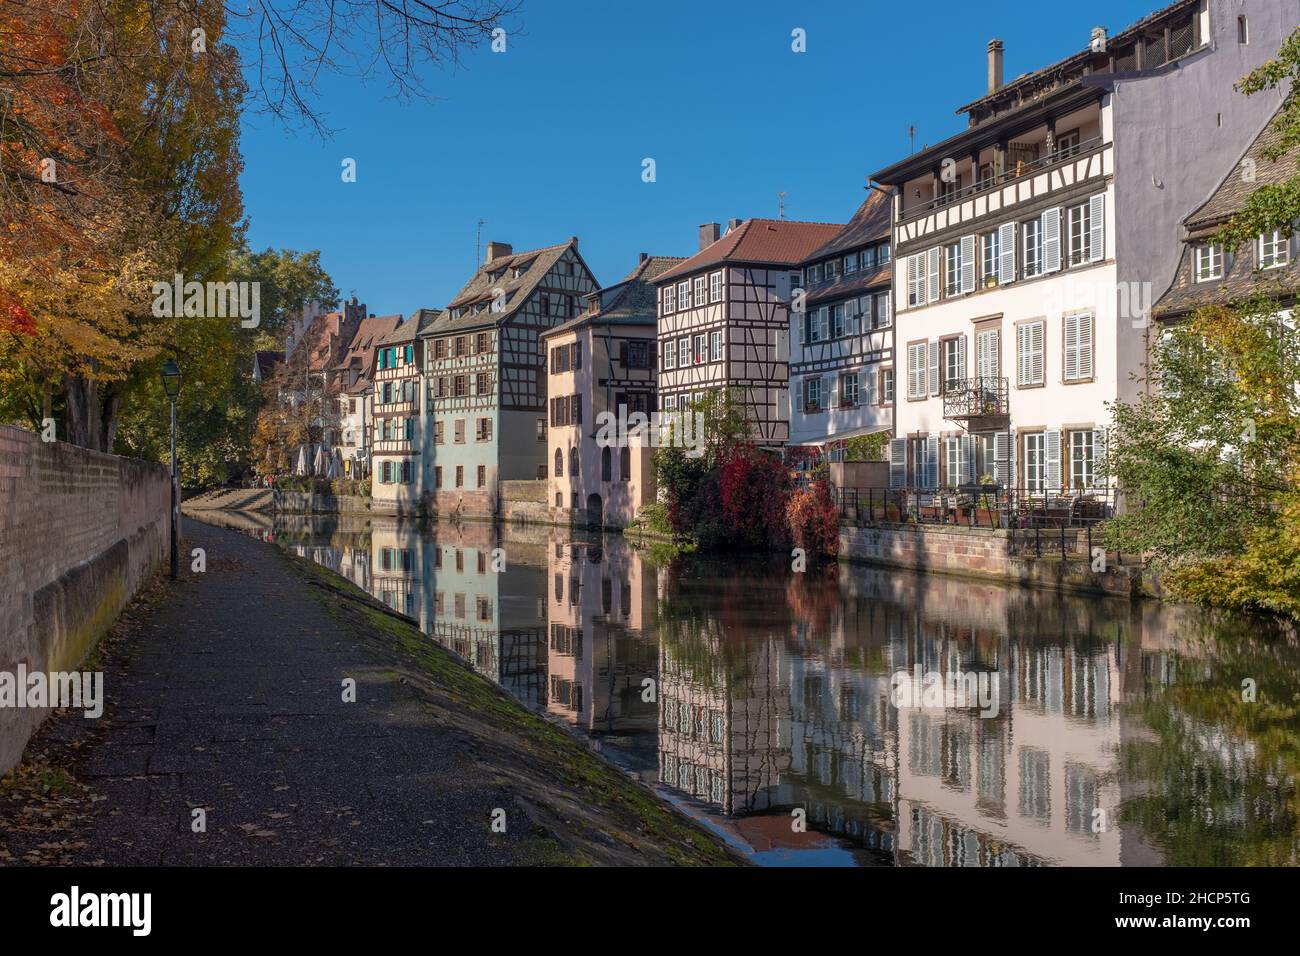 Strasbourg, France - October 24, 2021: Half-timbered houses of the Petite France district, taken on a sunny autumn afternoon with some unrecognizable Stock Photo